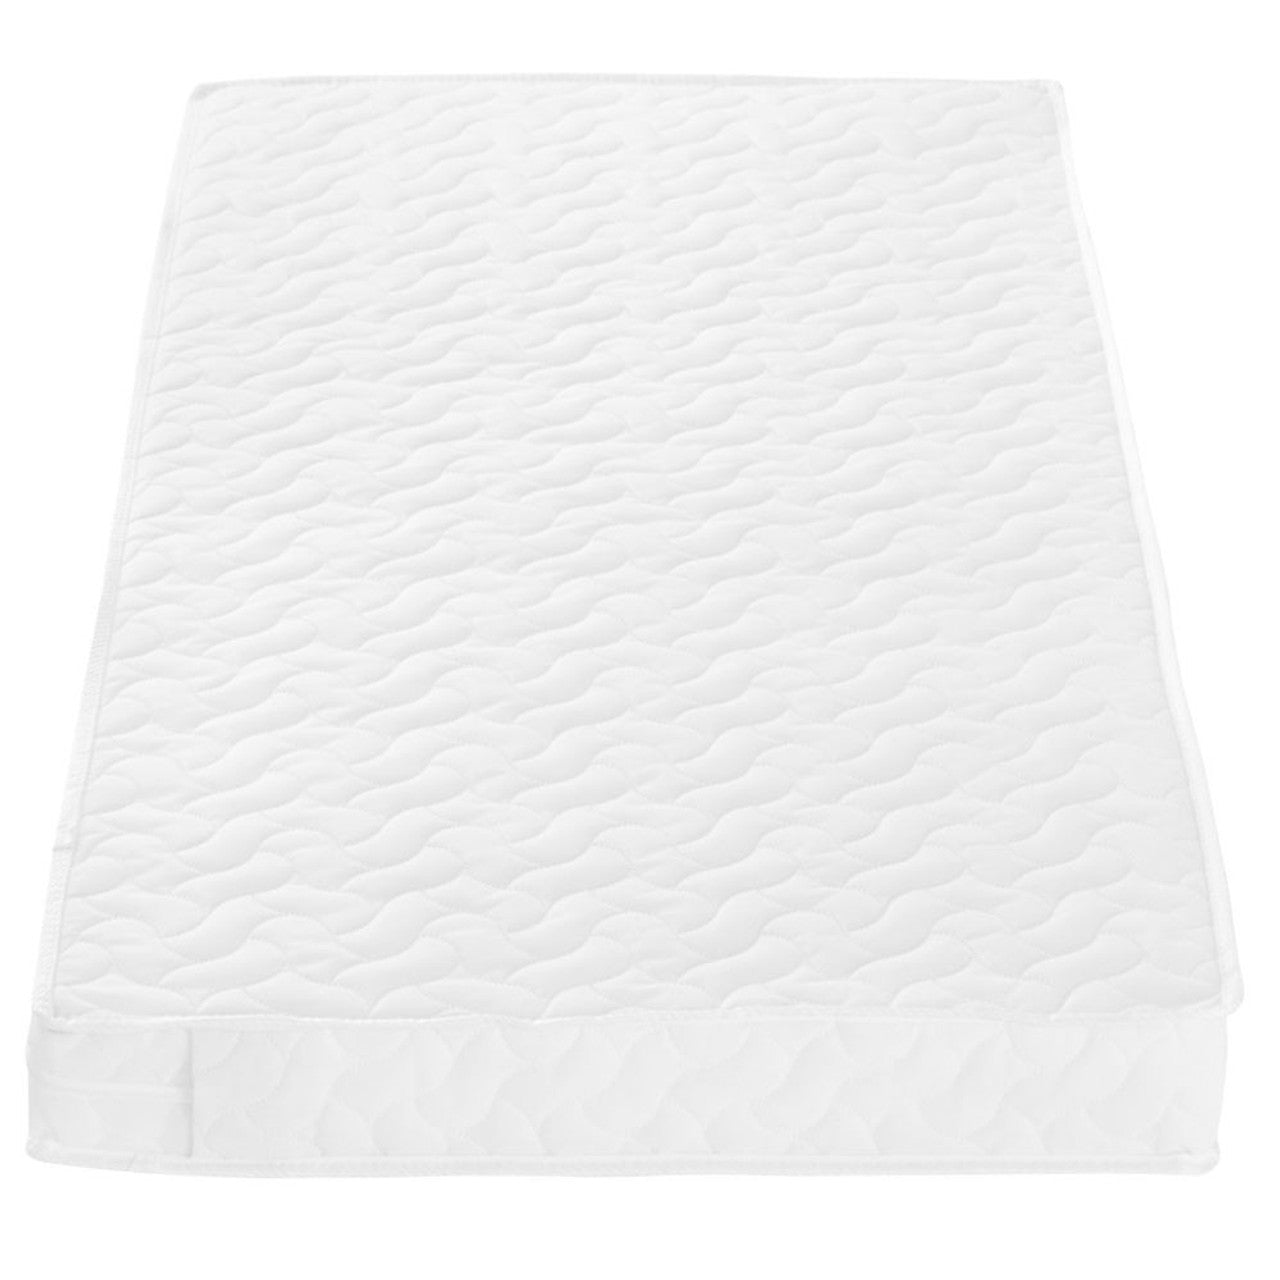 Tutti Bambini Pocket Sprung Cot Mattress (60 x 120 cm) - For Your Little One